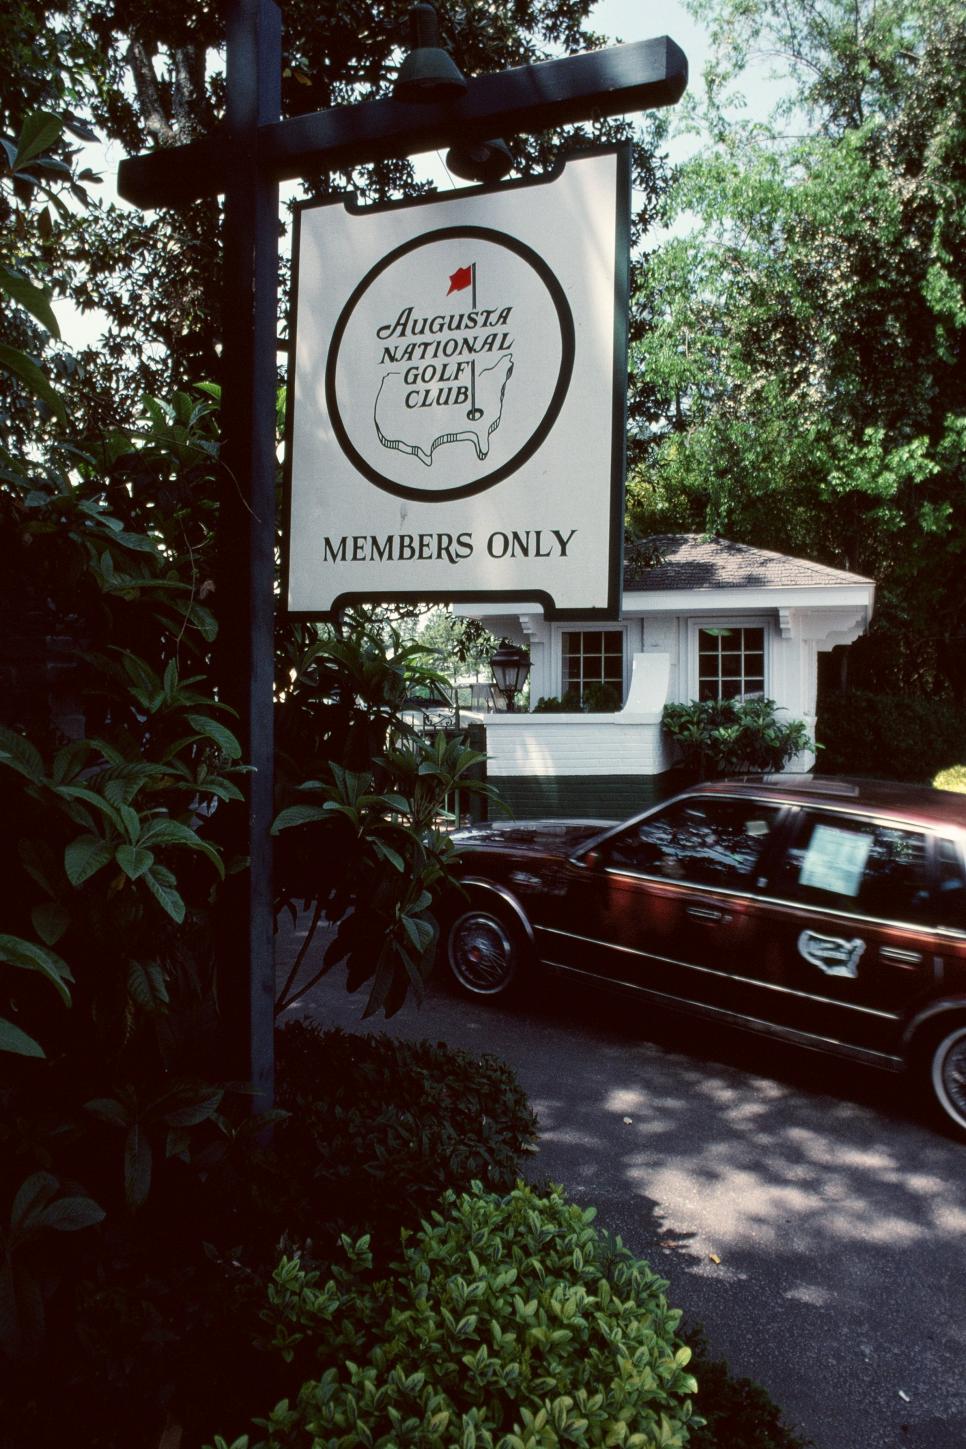 A Car Enters The Golf Club At The Main Entrance During The 1982 Masters Tournament